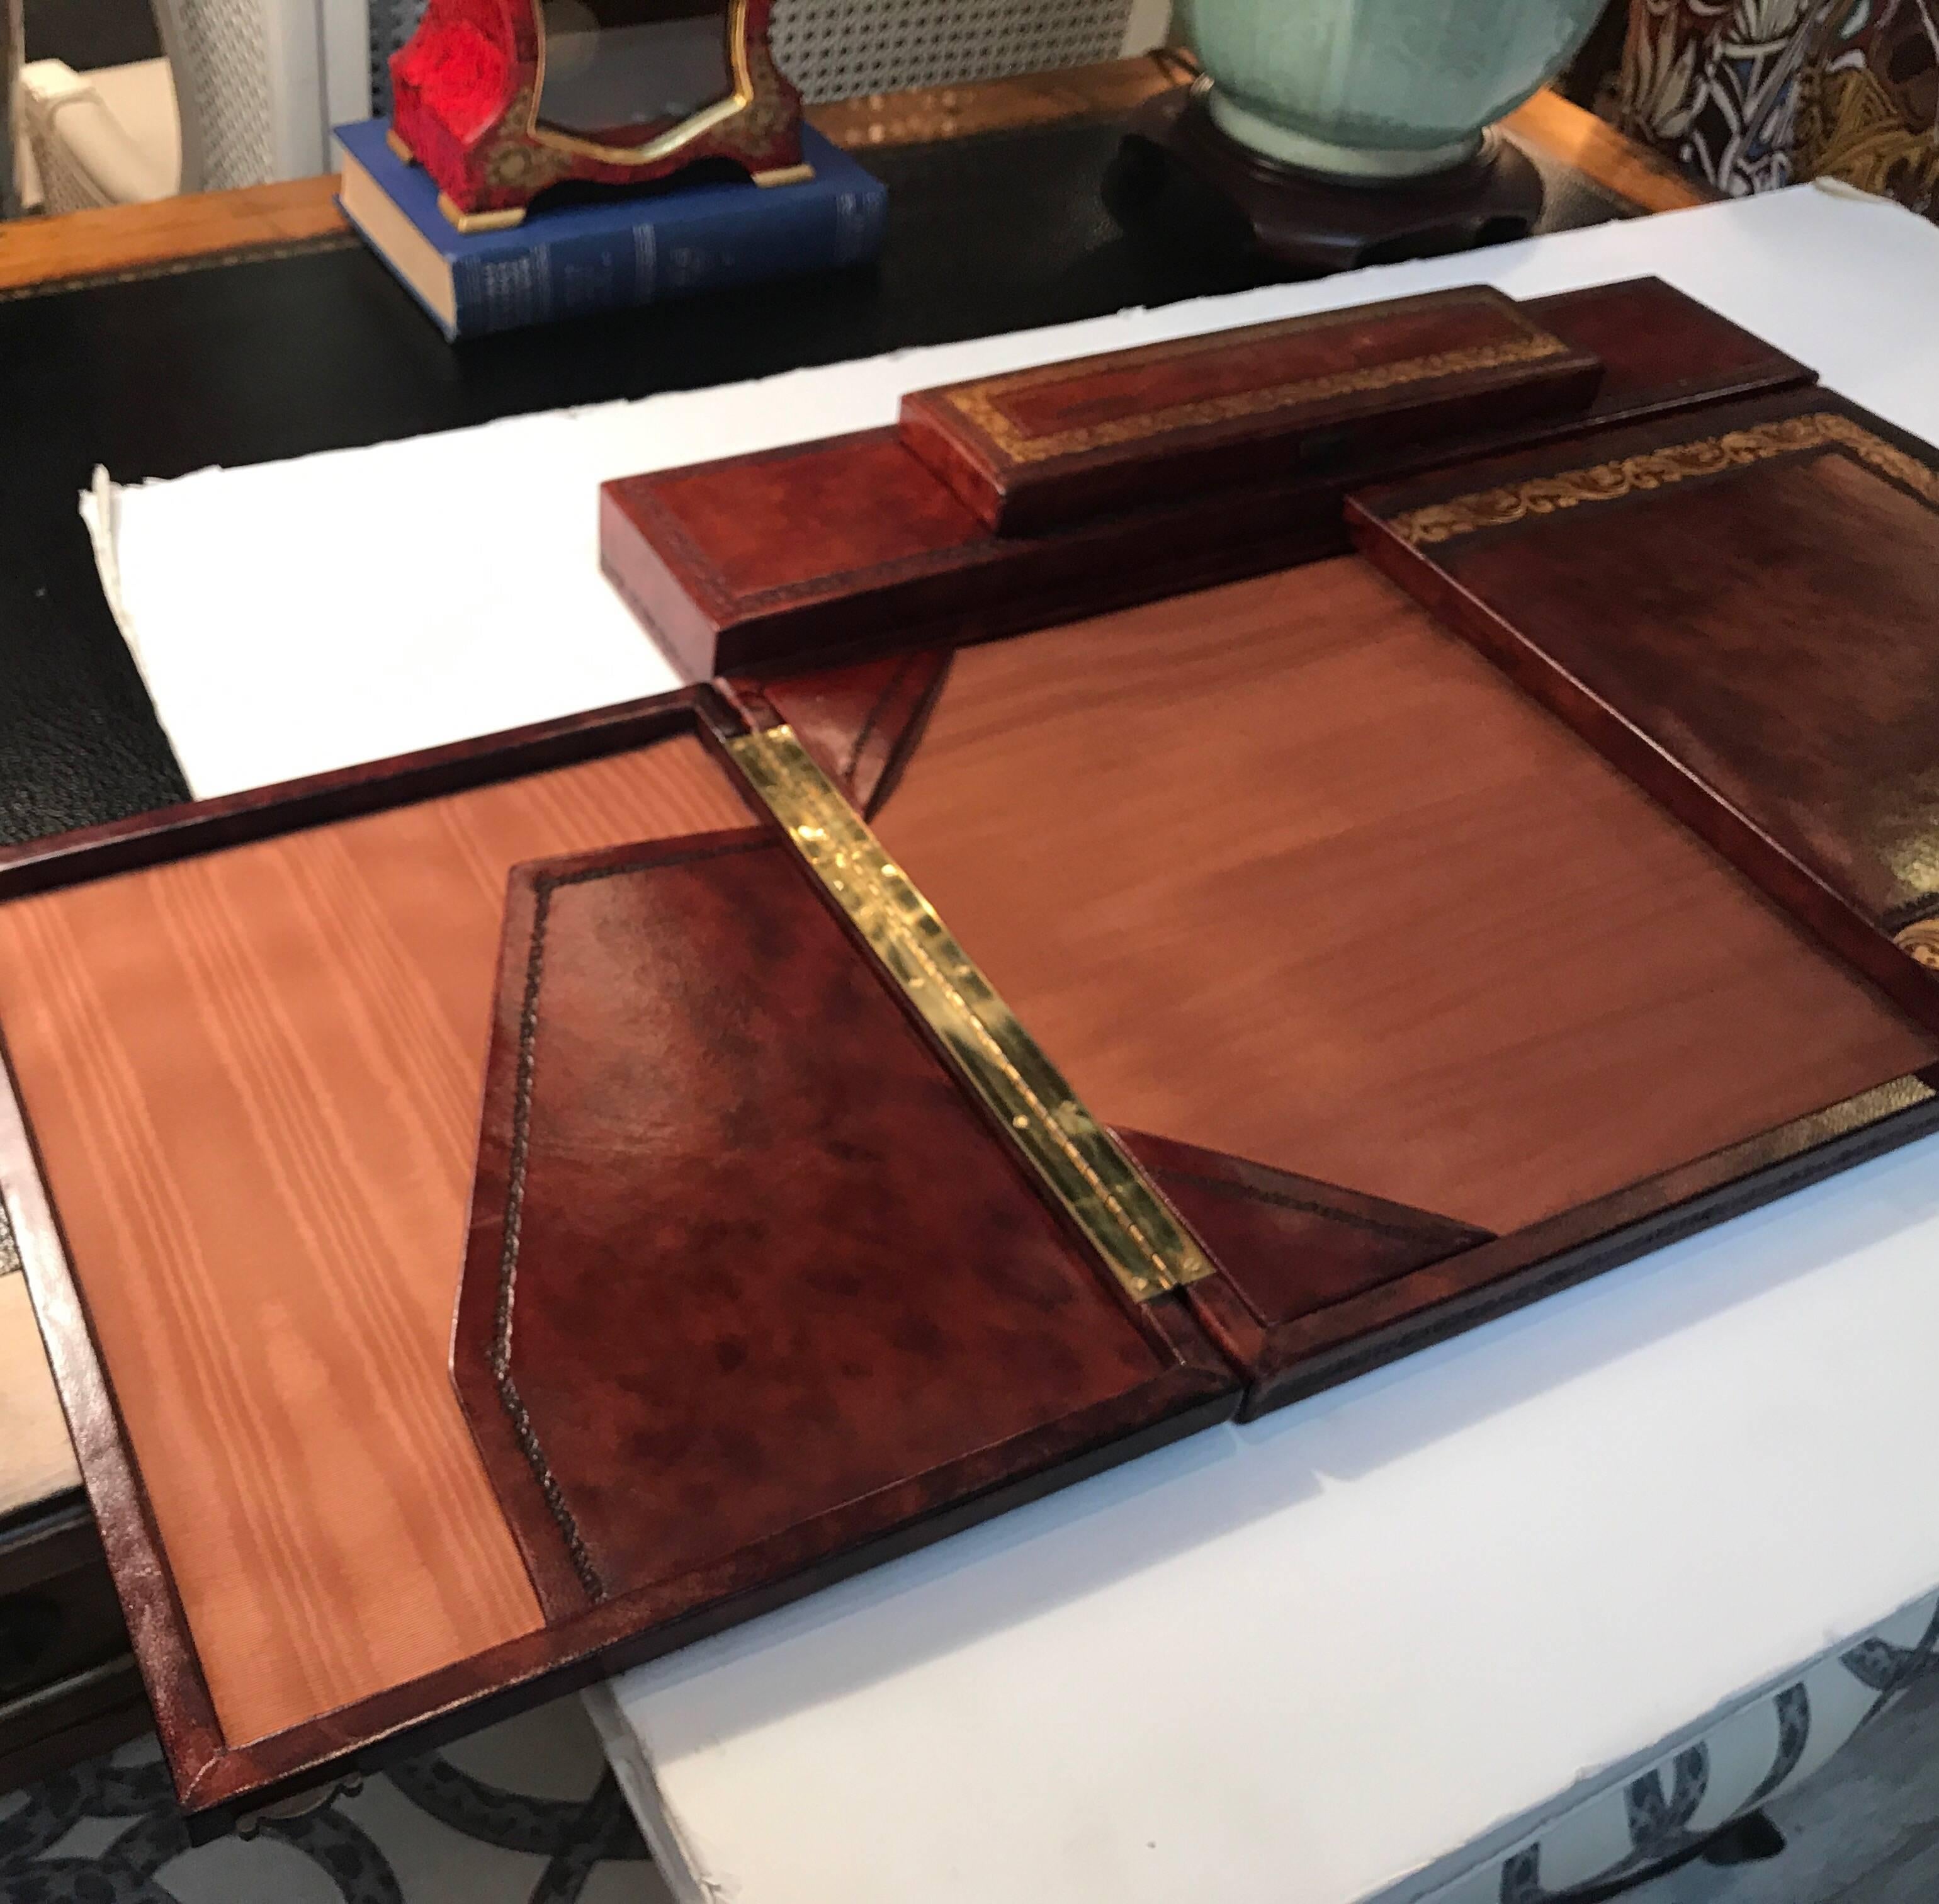 Sophisticated rich Italian leather desk organizer. The tooled leather surface, opens to reveal the blotter and pockets for writing paper. The top also has a hinged compartment for pens. Made by Horchow.